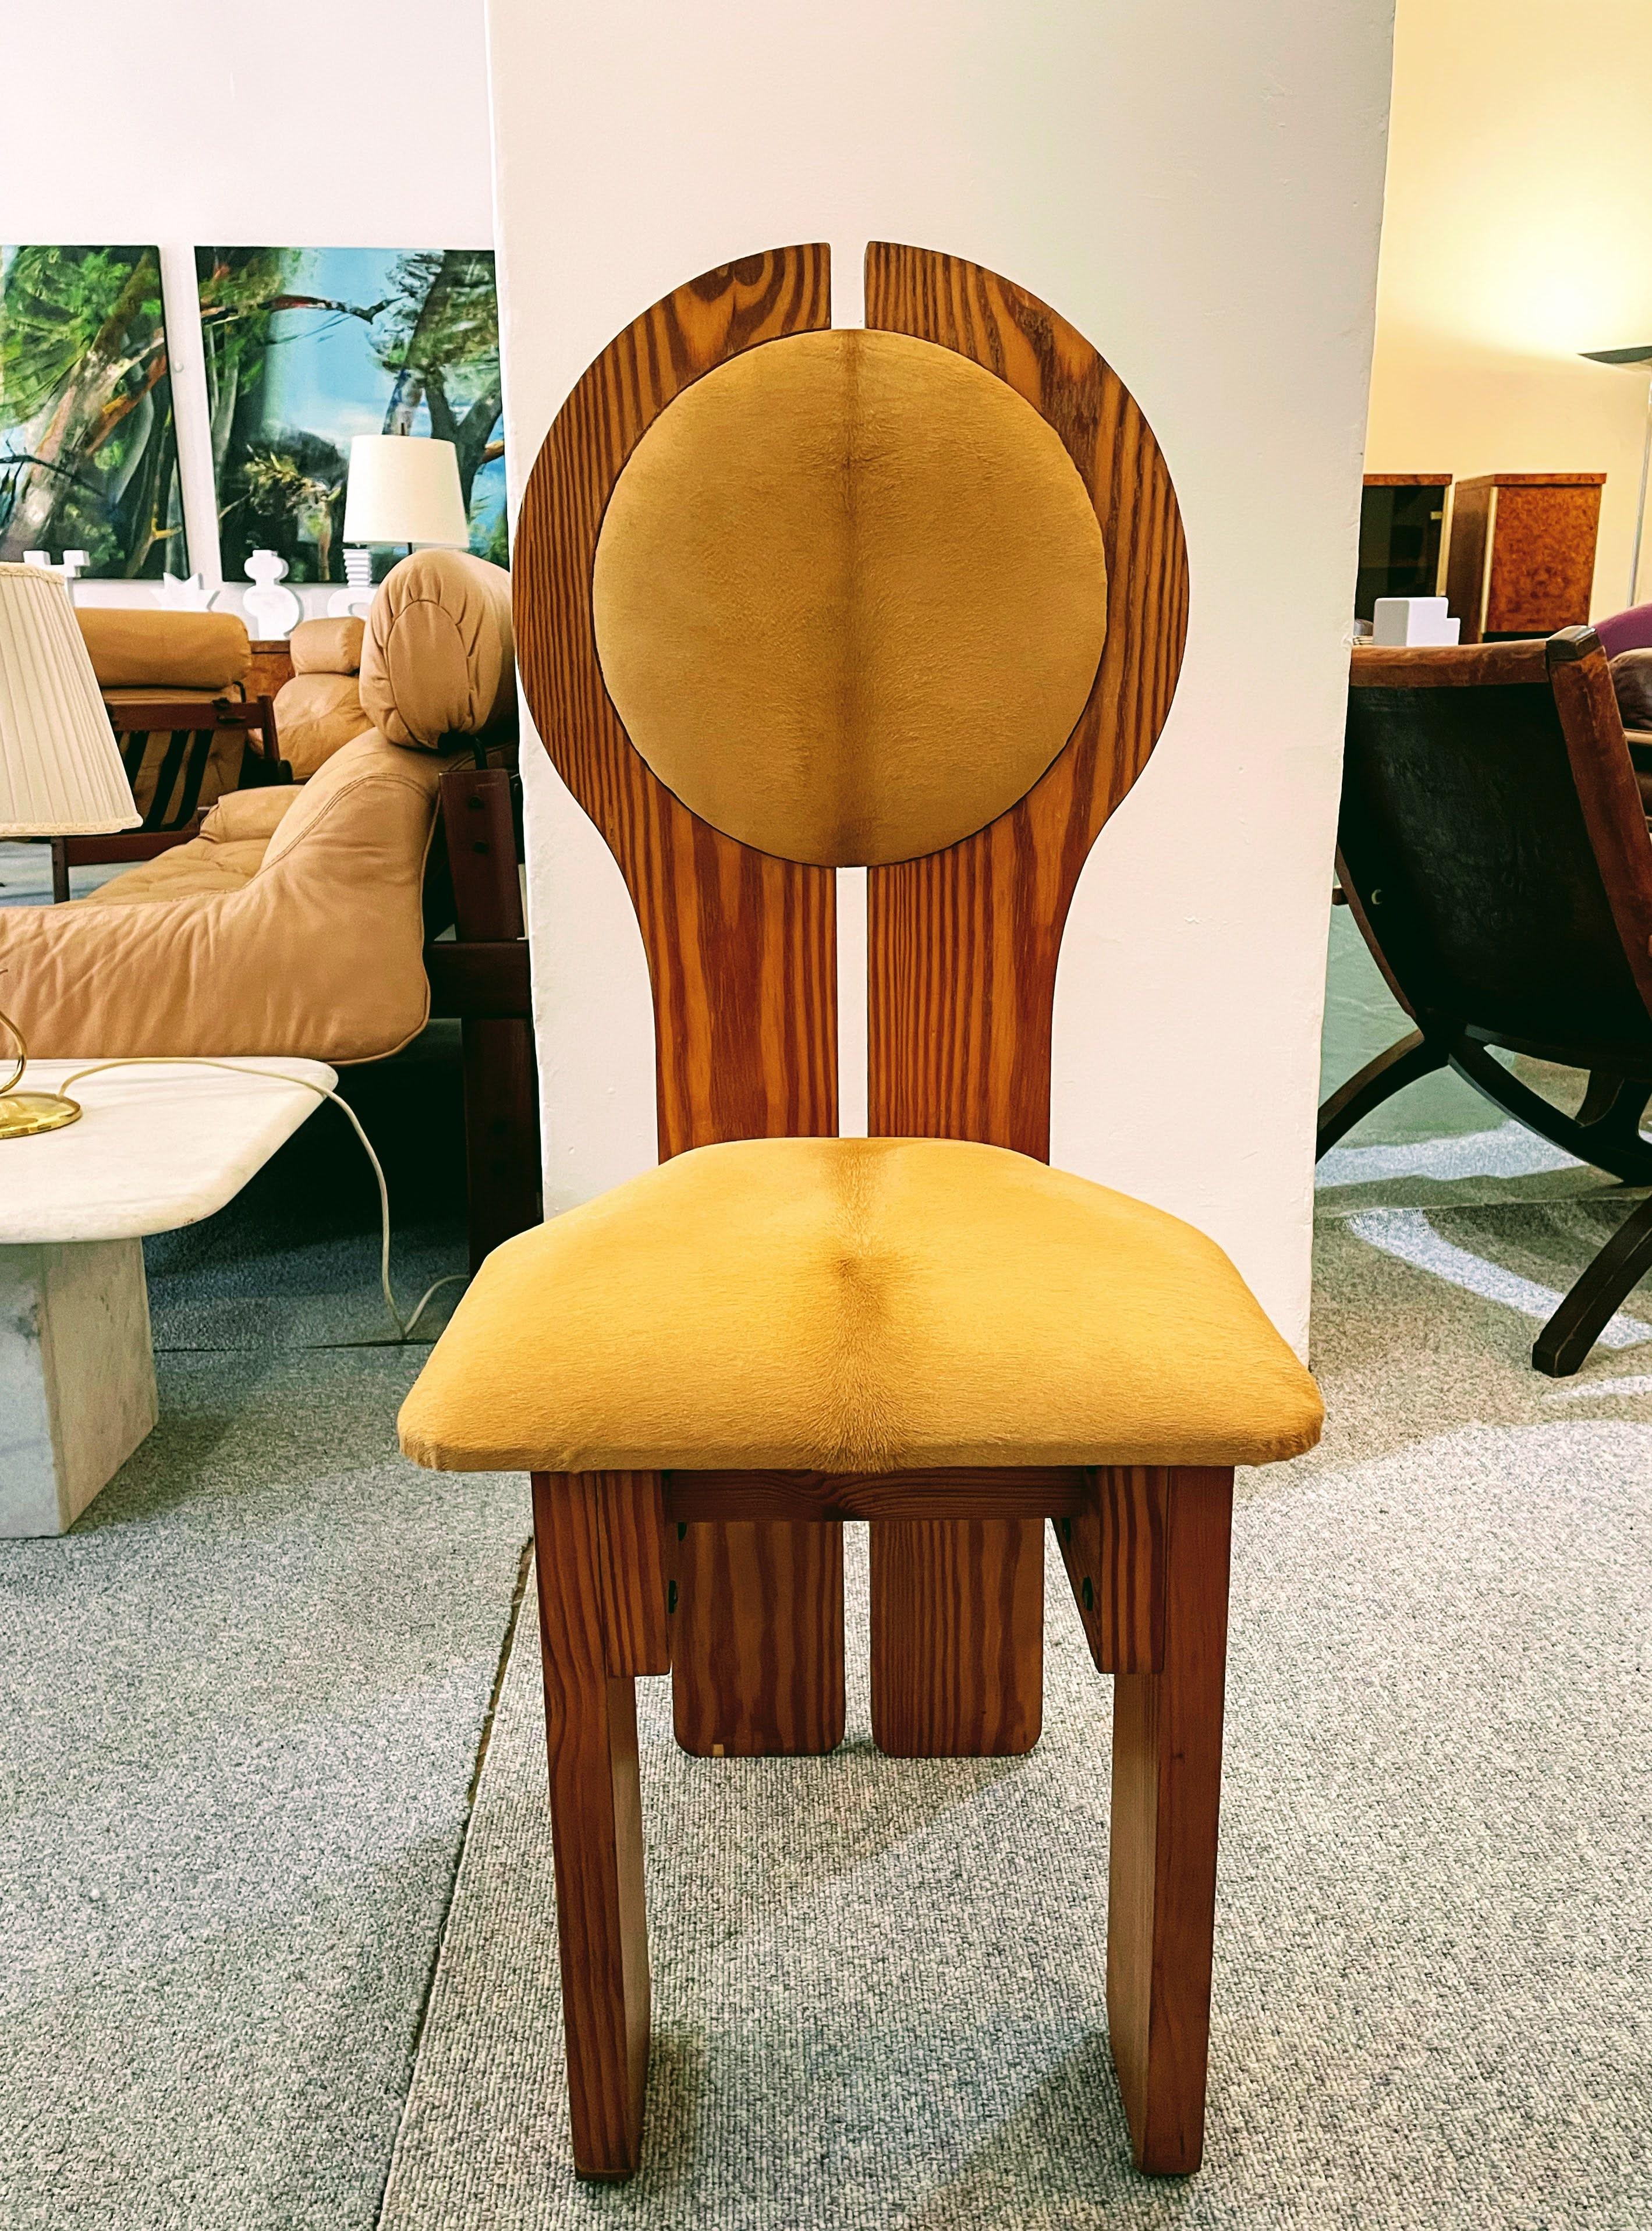 Unique and original form design piece from Hungary, 1970s.
Very organic pistil-like shape. Seat and back upholstered with ponyskin on pinewood veneered frame.
Overall, this rare chair has a great character.
Please see all pictures for more details.
 